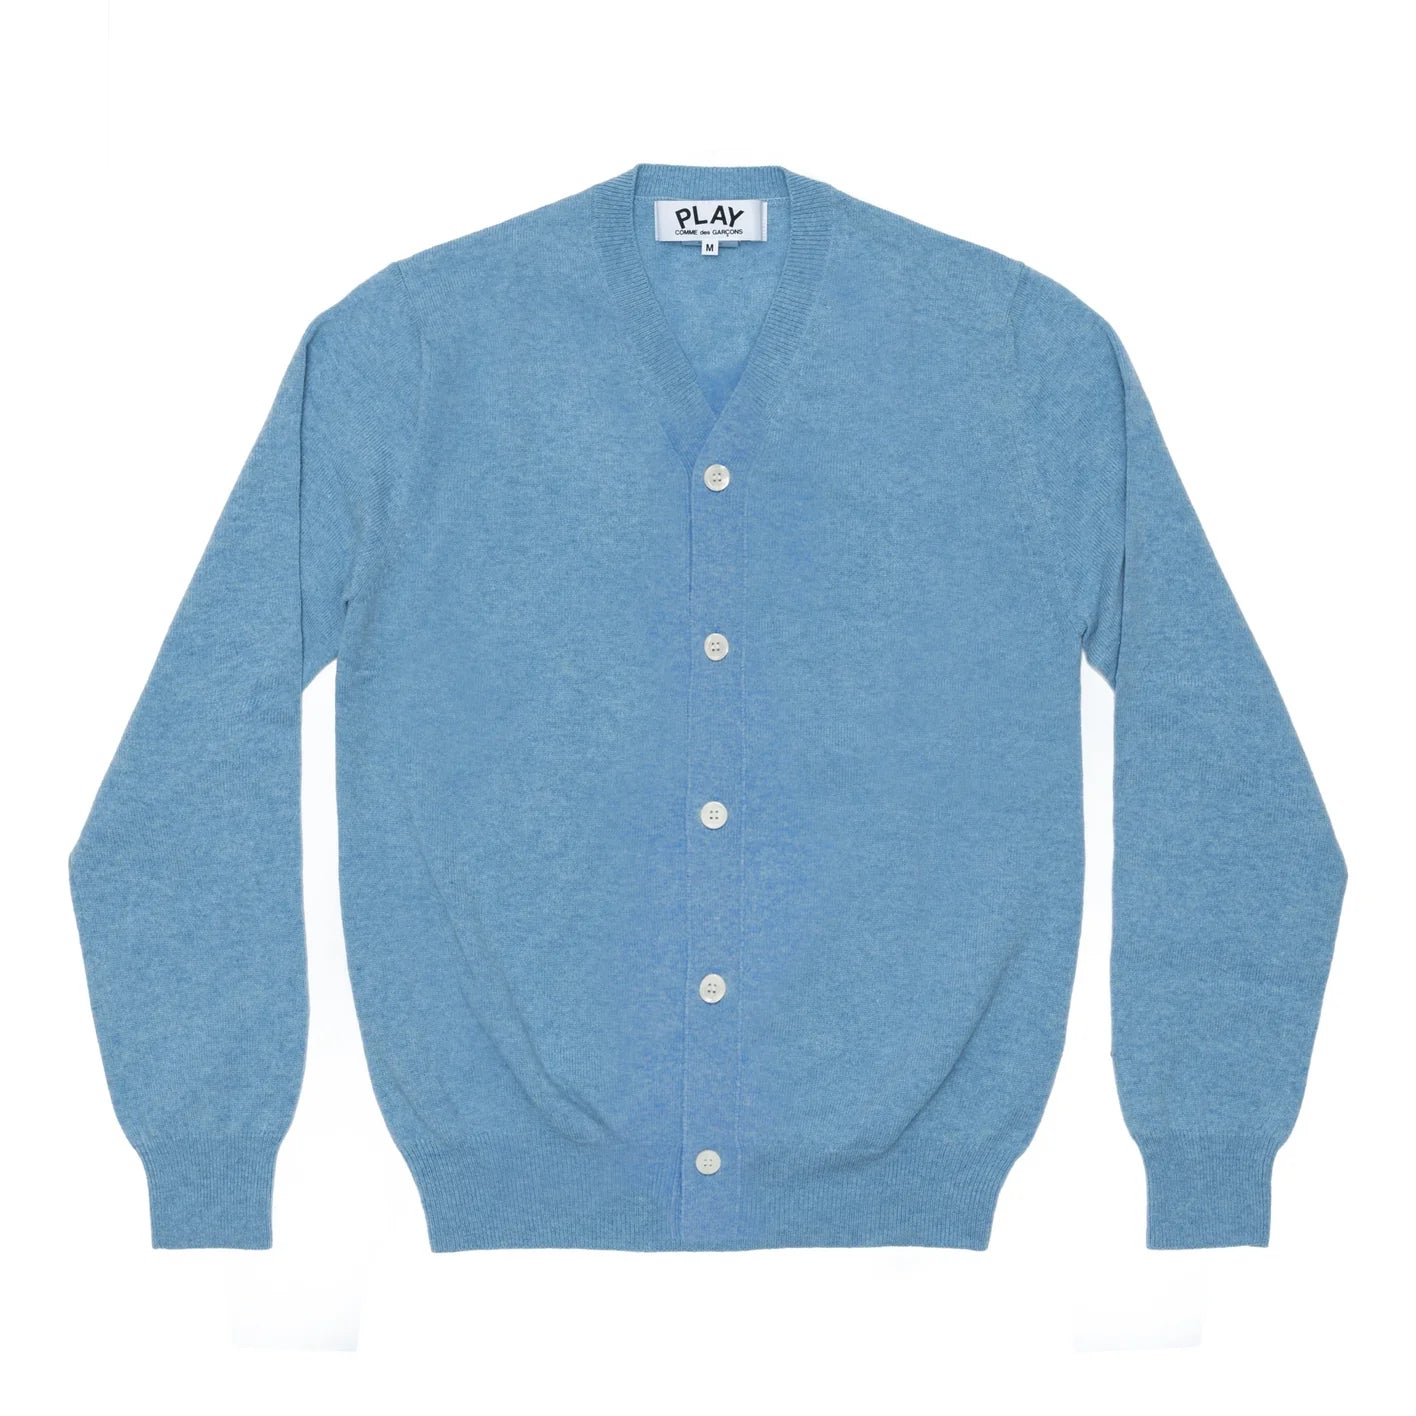 Play - Men's Lambswool V Neck Cardigan - (Blue) view 1